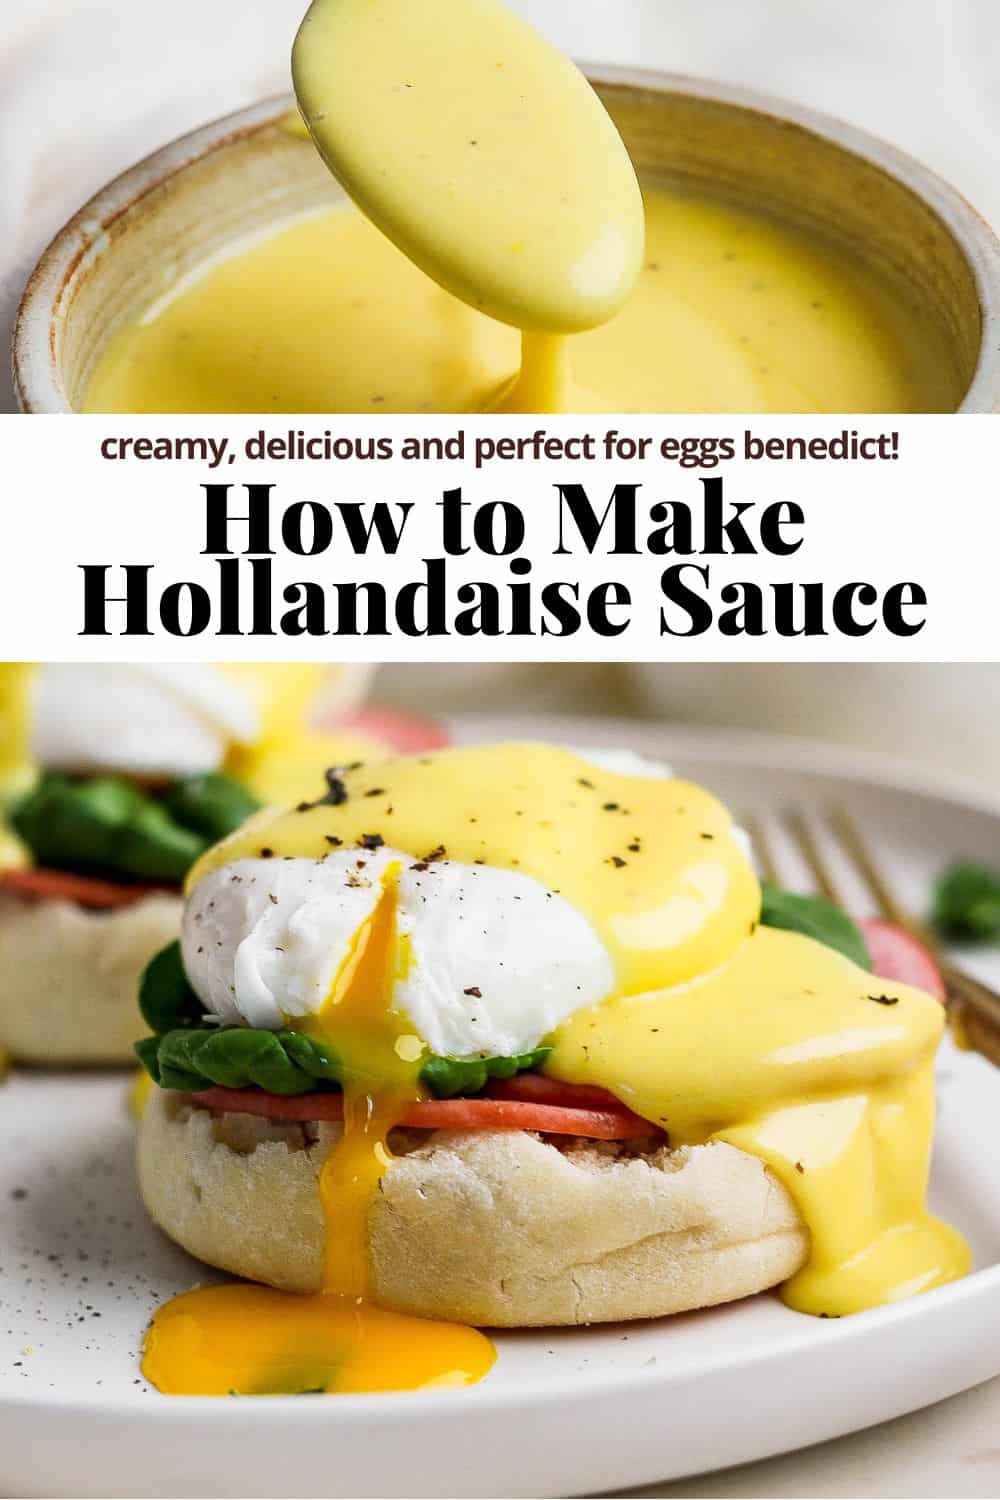 Pinterest image for how to make hollandaise sauce.